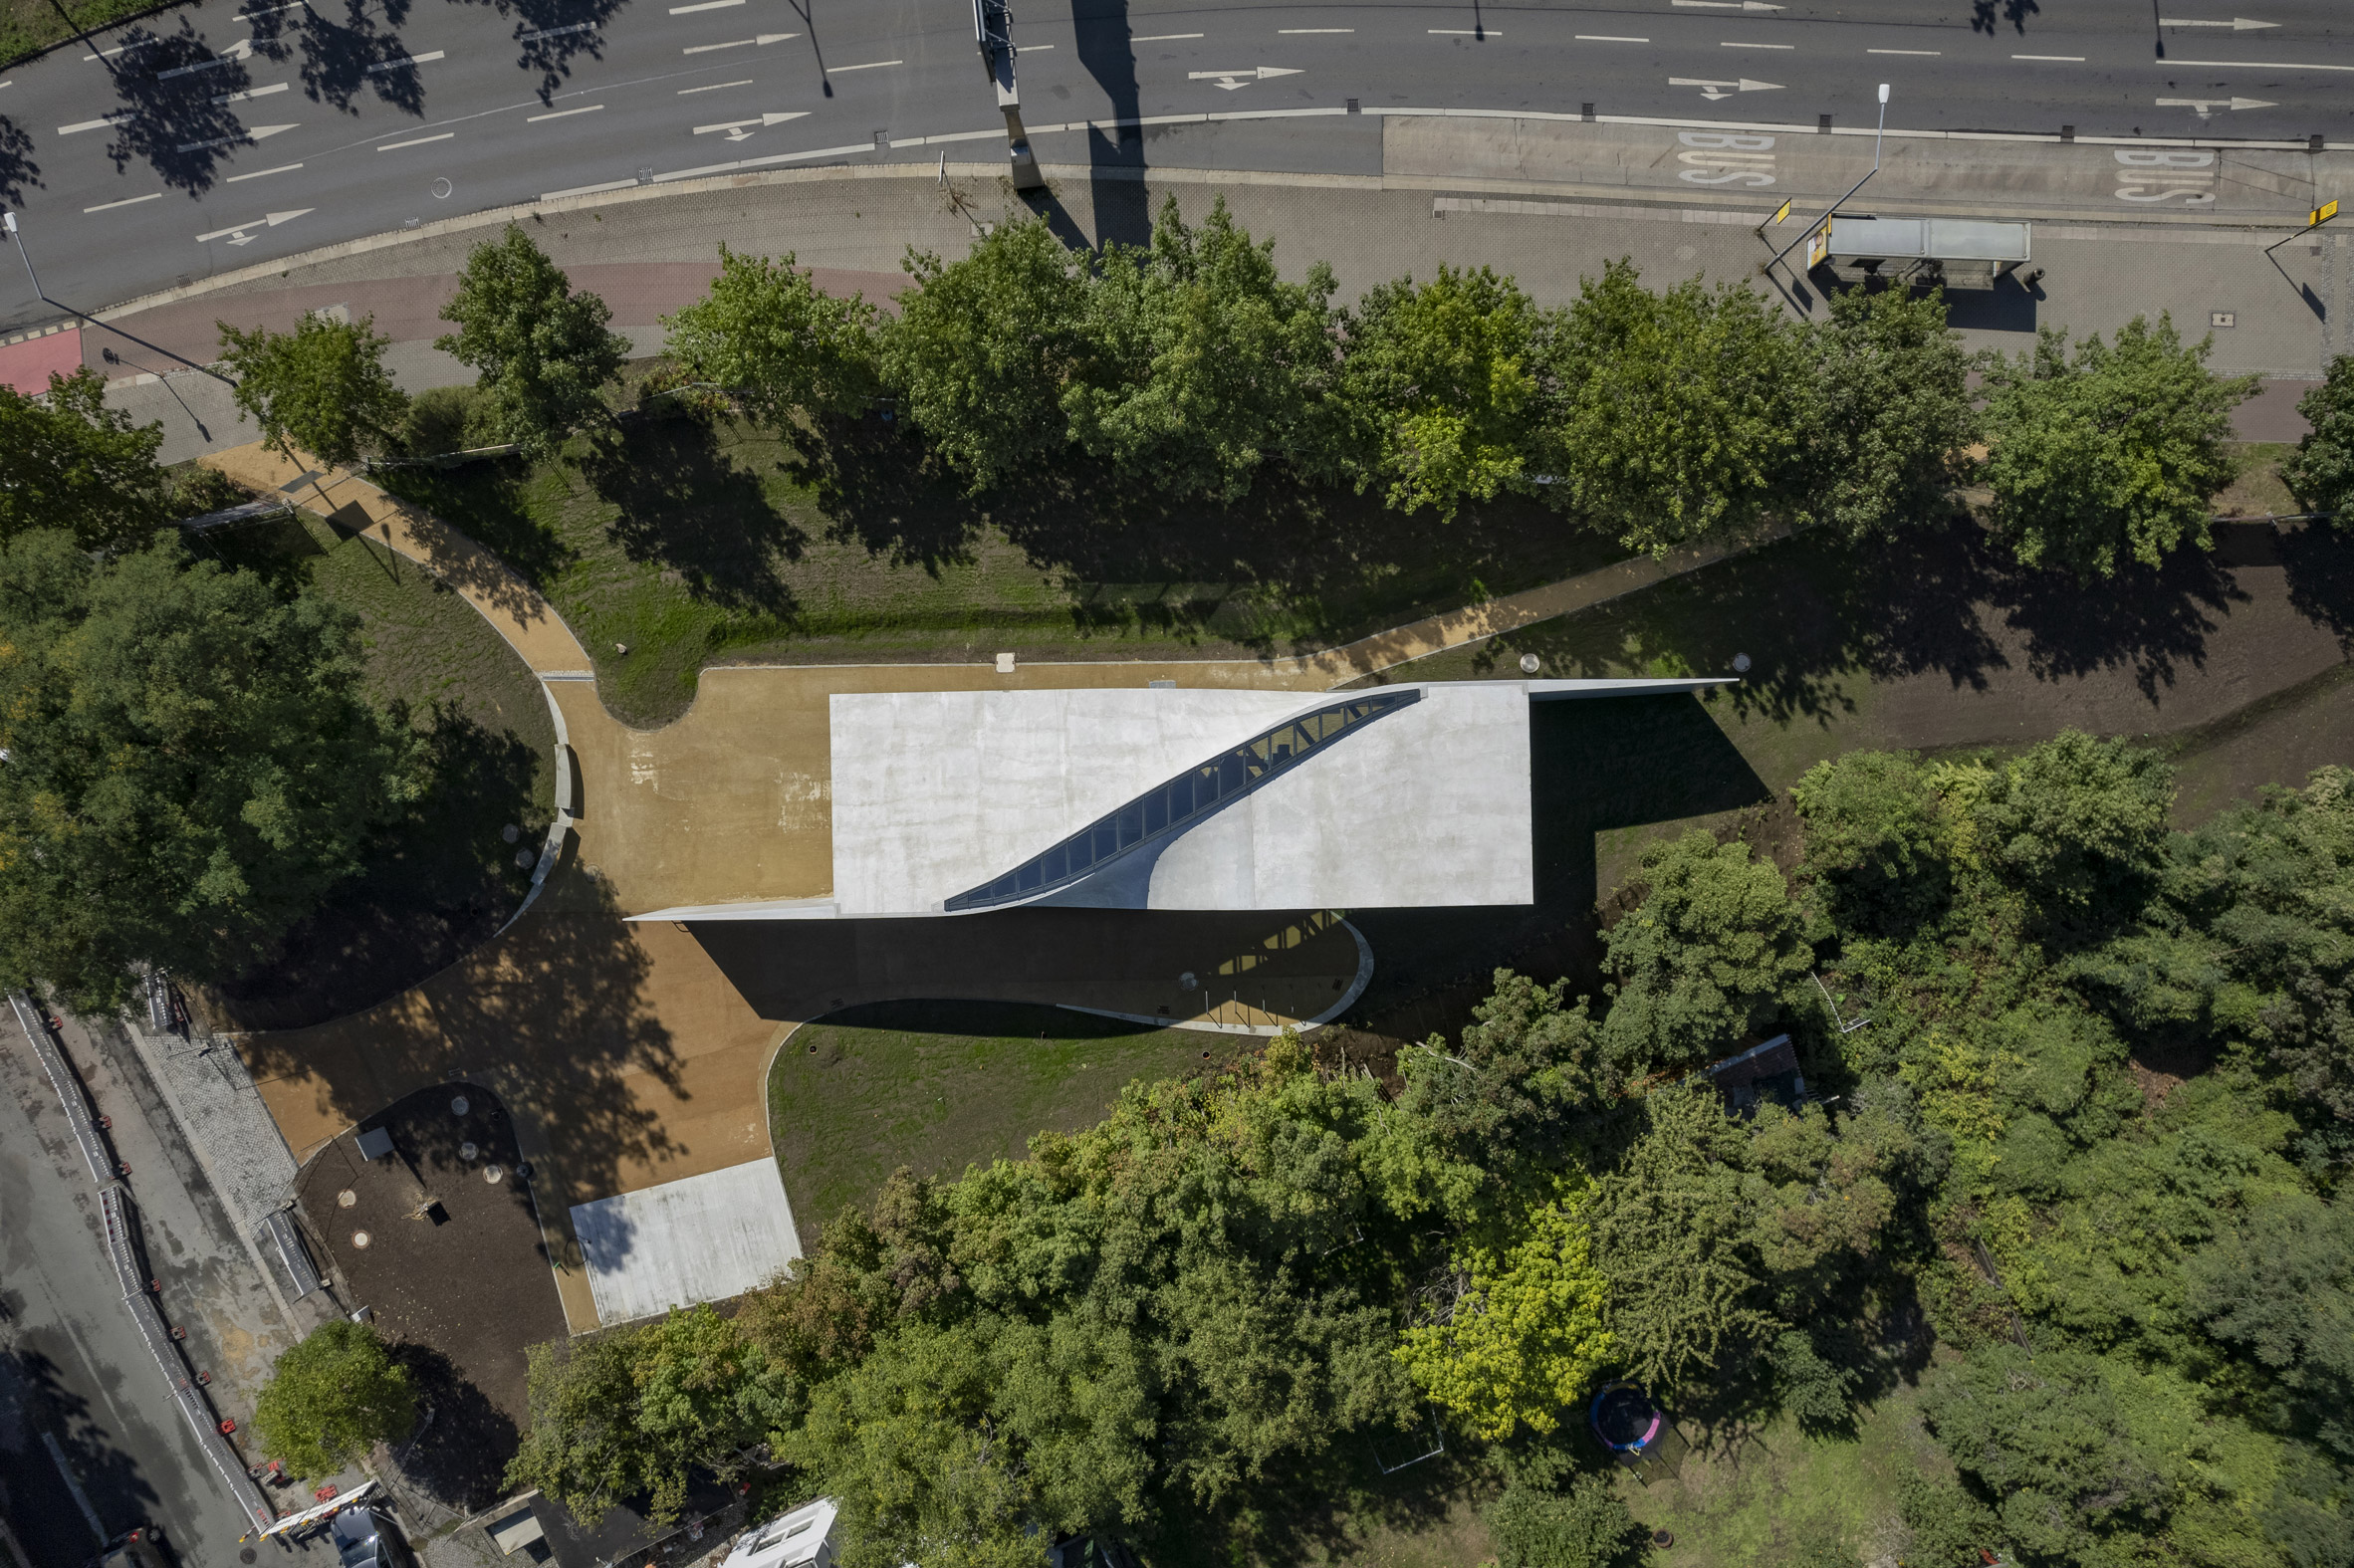 Aerial view of the Cube building at TU Dresden surrounded by trees